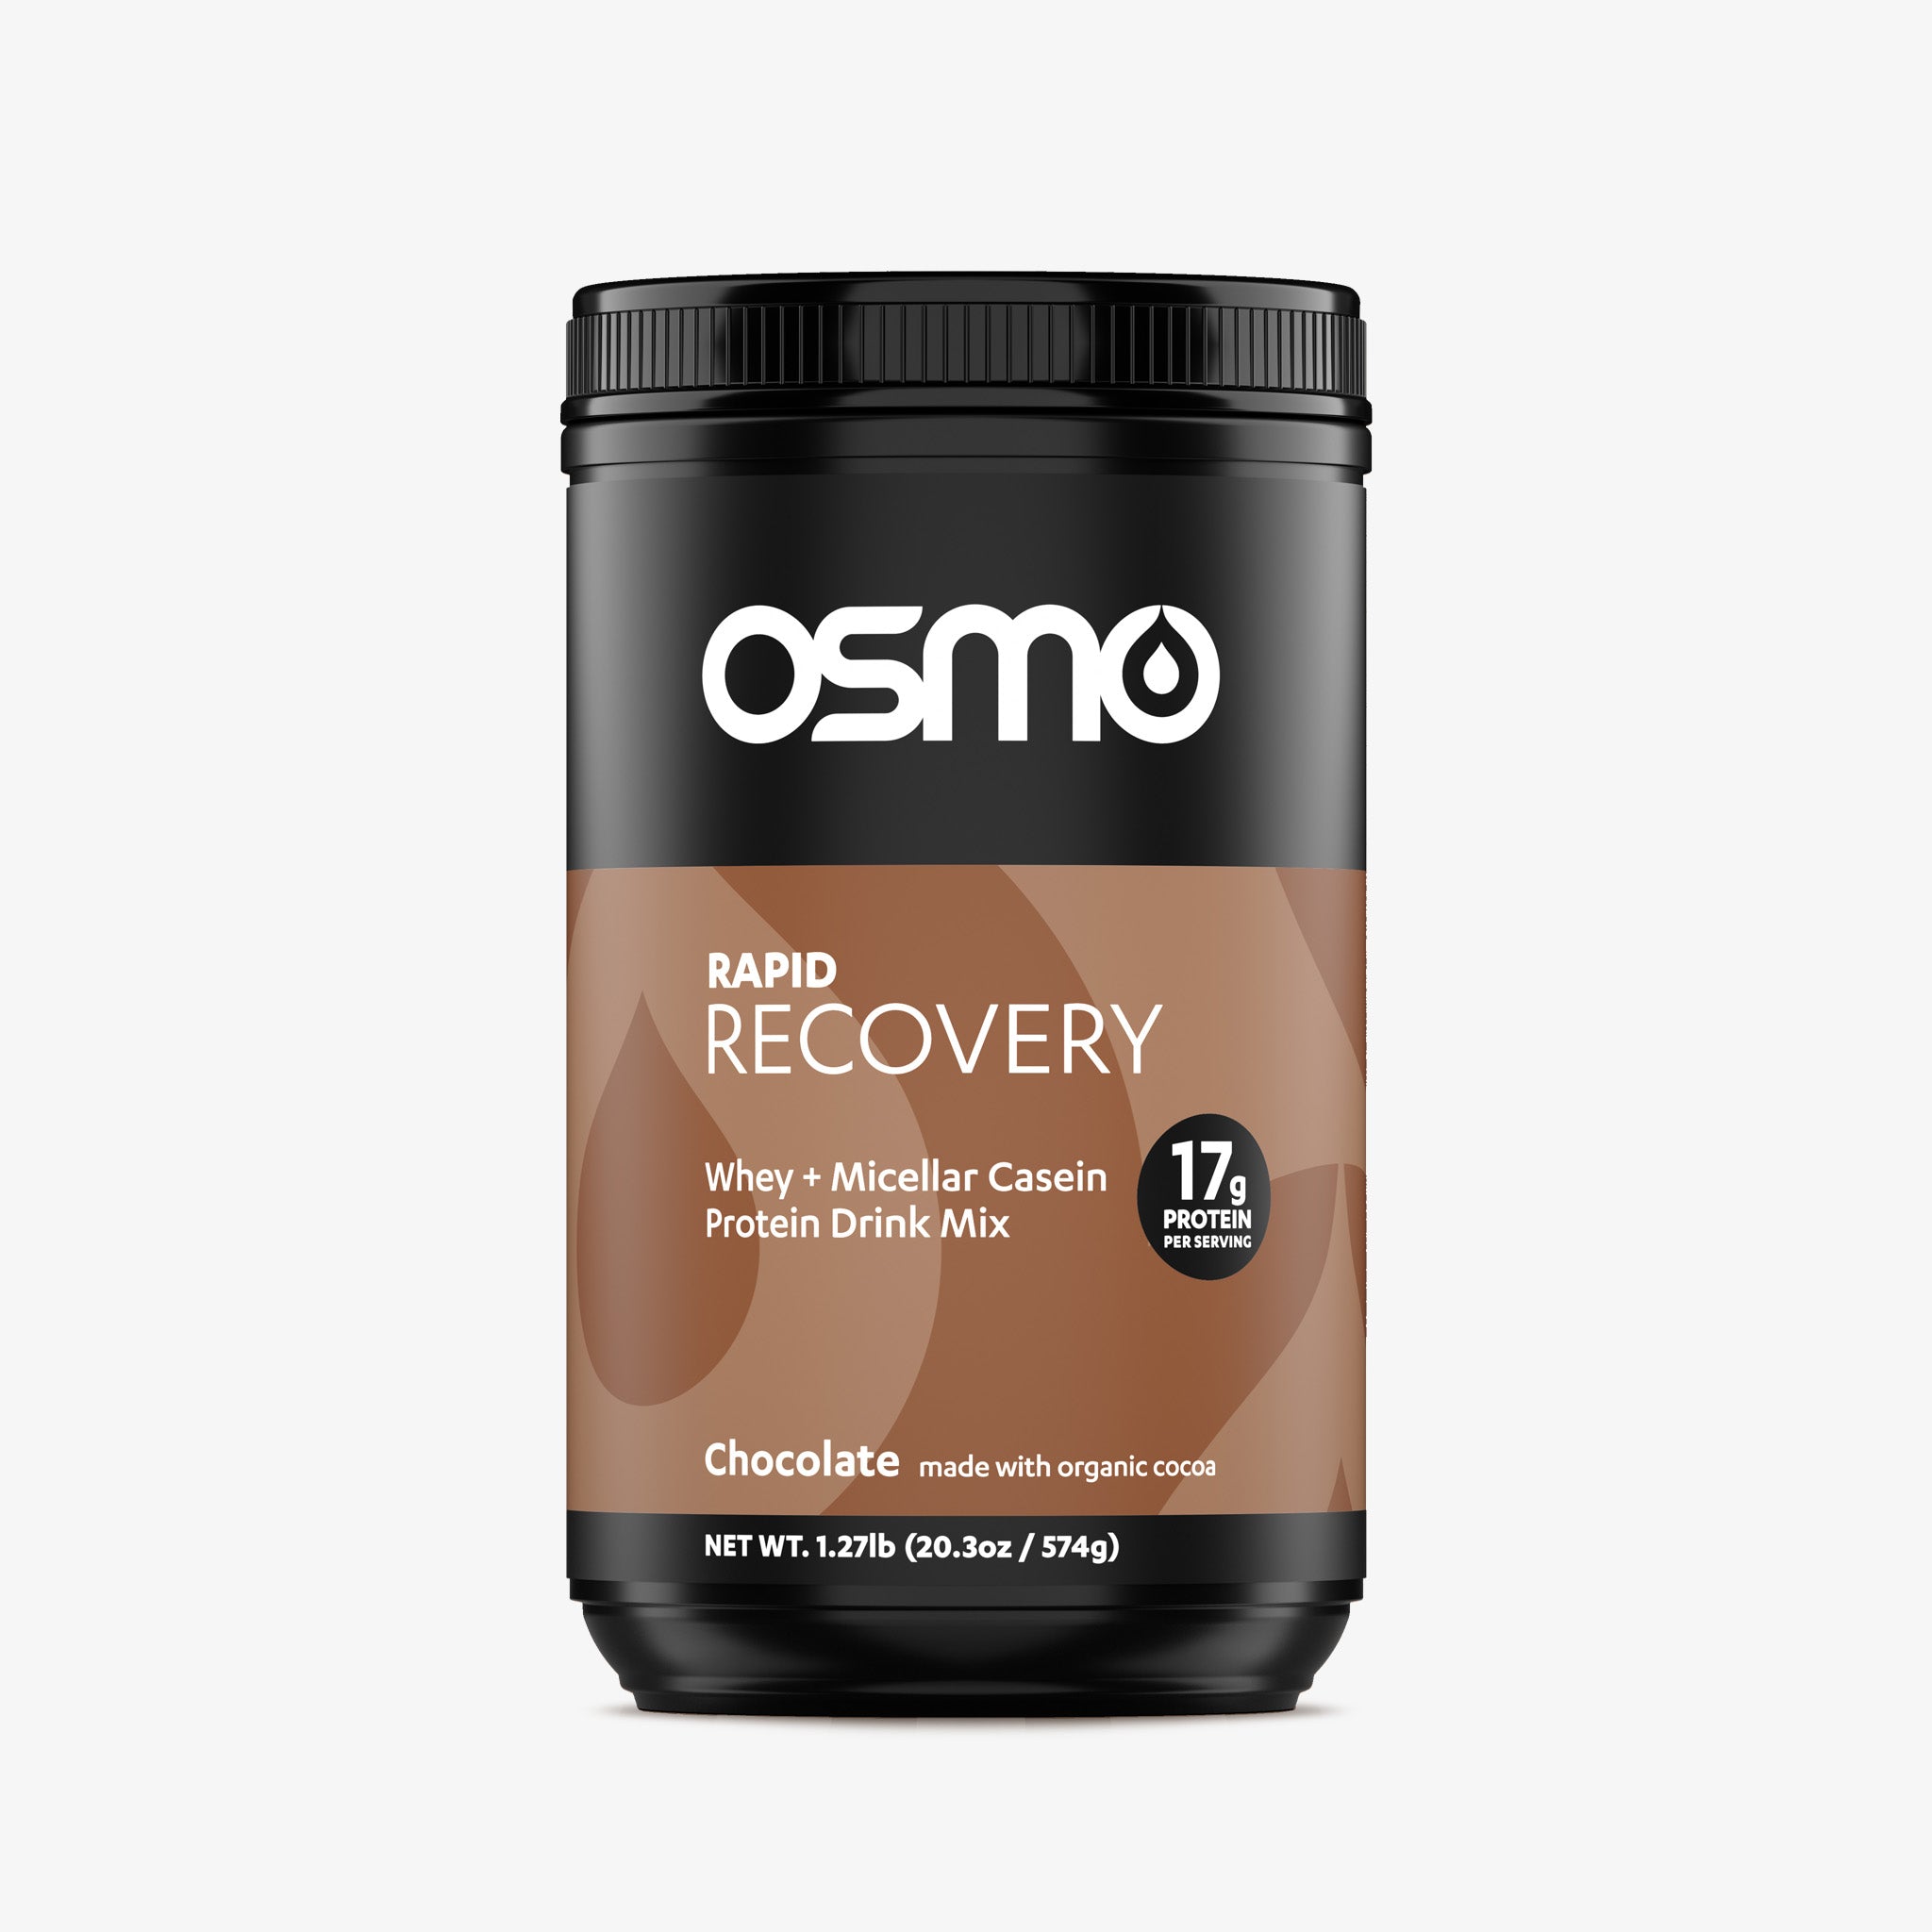 Osmo Rapid Recovery